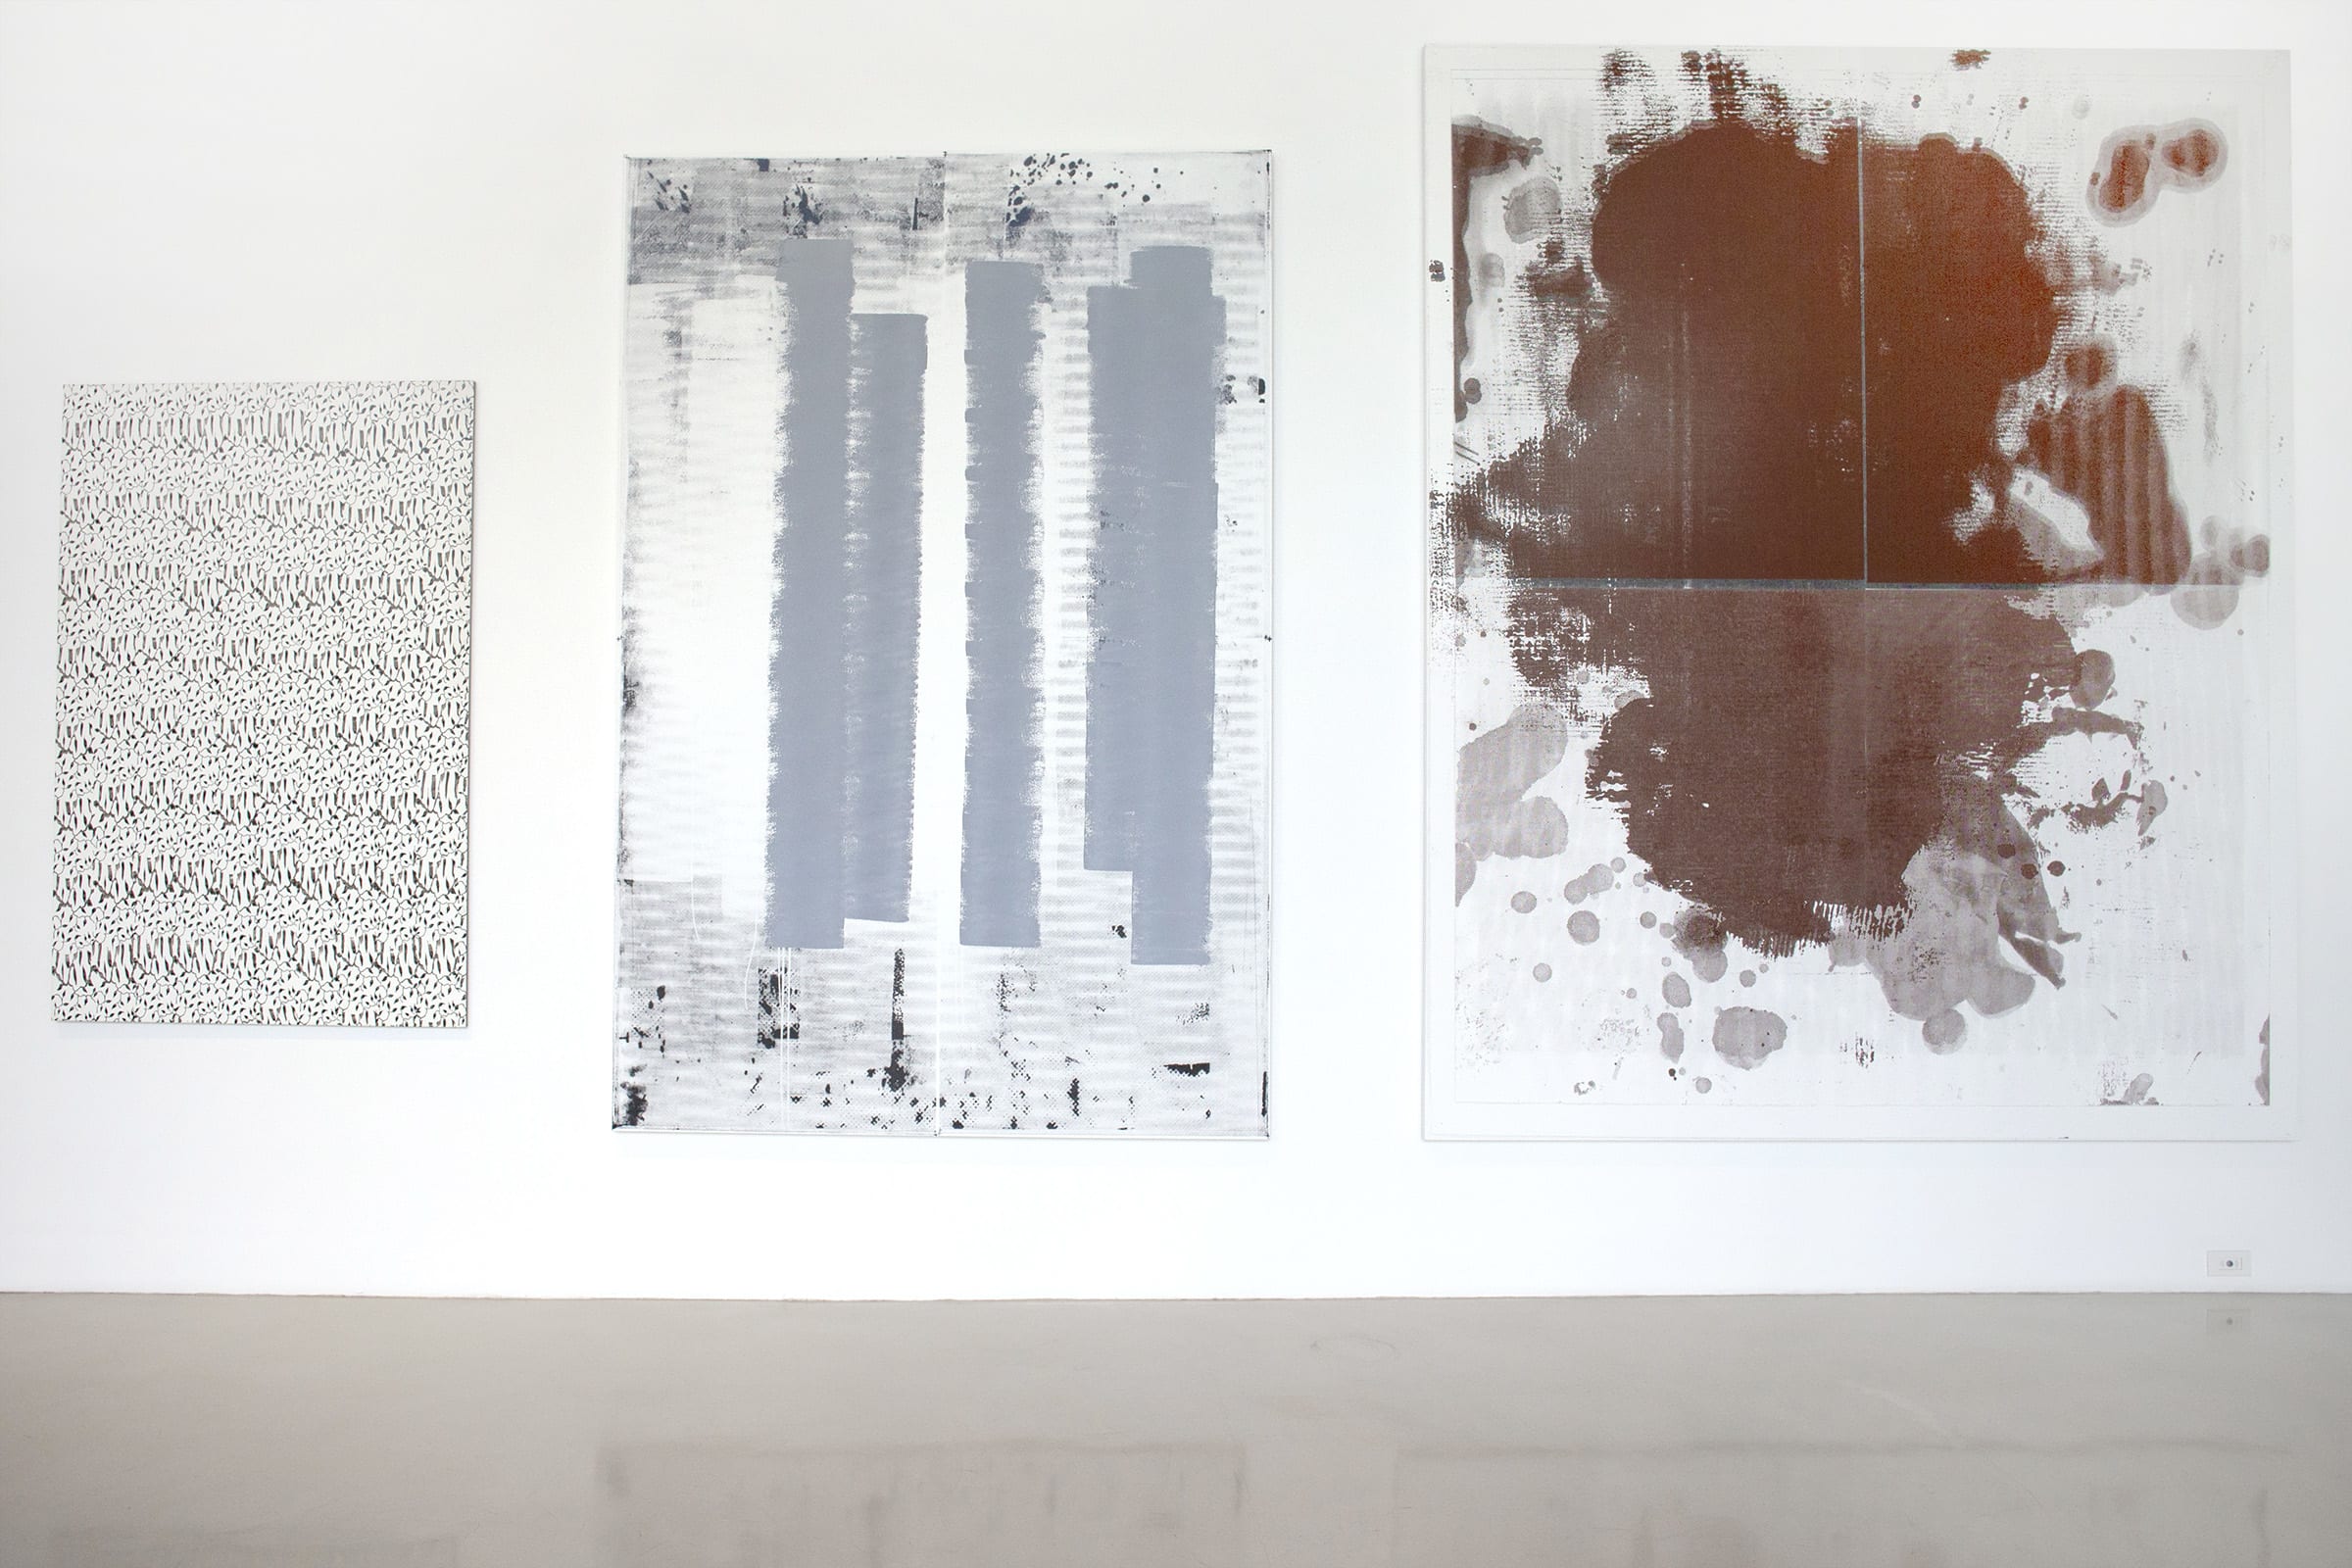 Installation view of Christopher Wool, Untitled, 1988 (left); Untitled (H.H.), 2003 (middle); and Untitled, 2011 (right). Courtesy of the de la Cruz Collection.